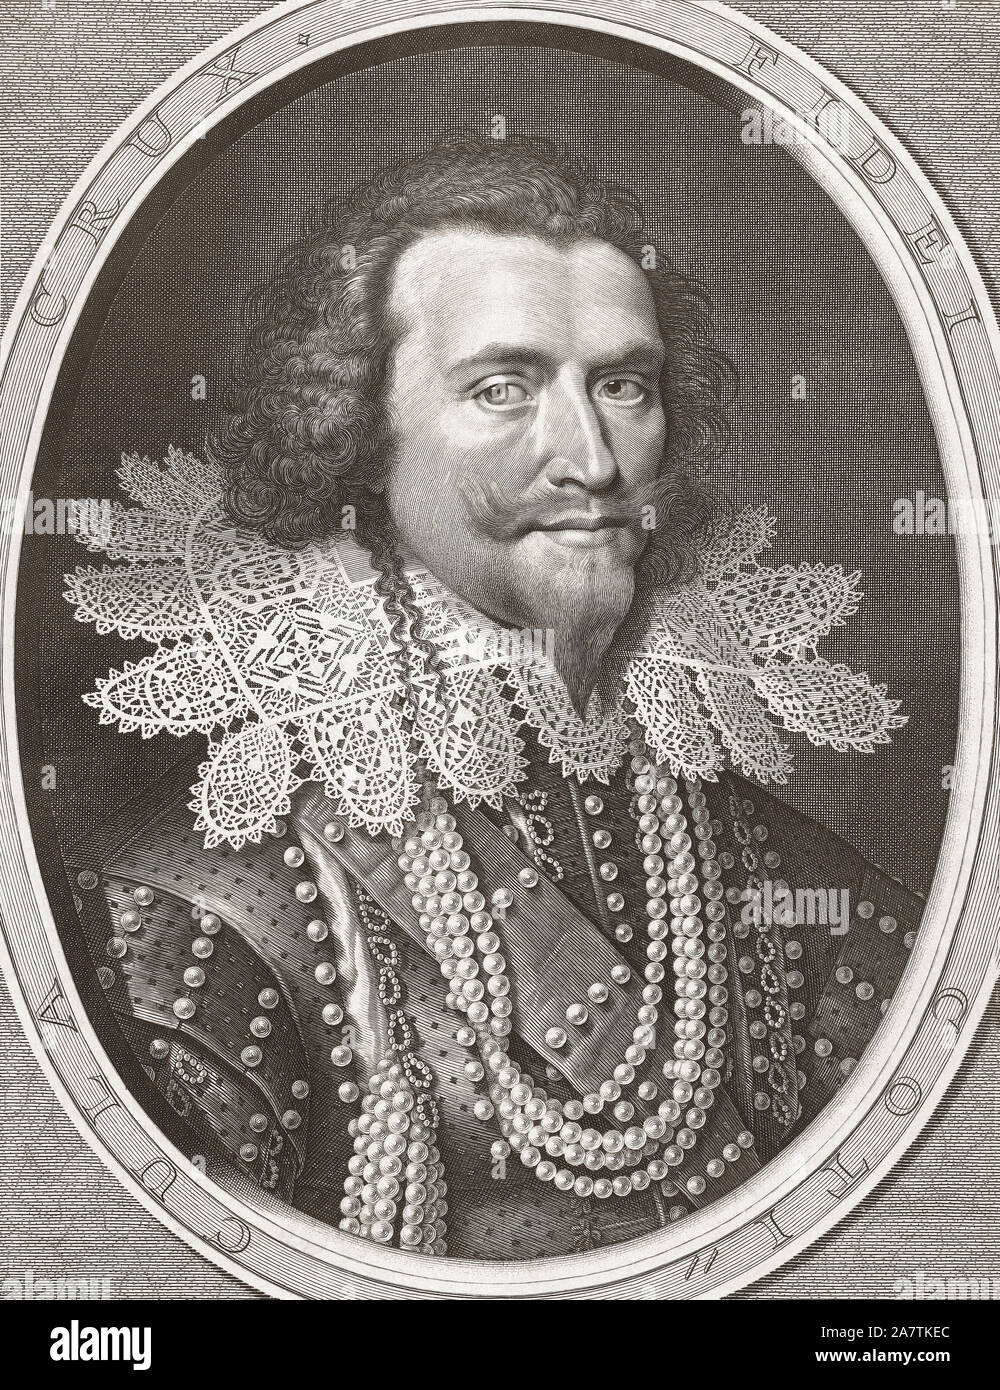 George Villiers, 1st Duke of Buckingham, 1592 to 1628. English courtier, politician and favourite of King James I of England. Stock Photo